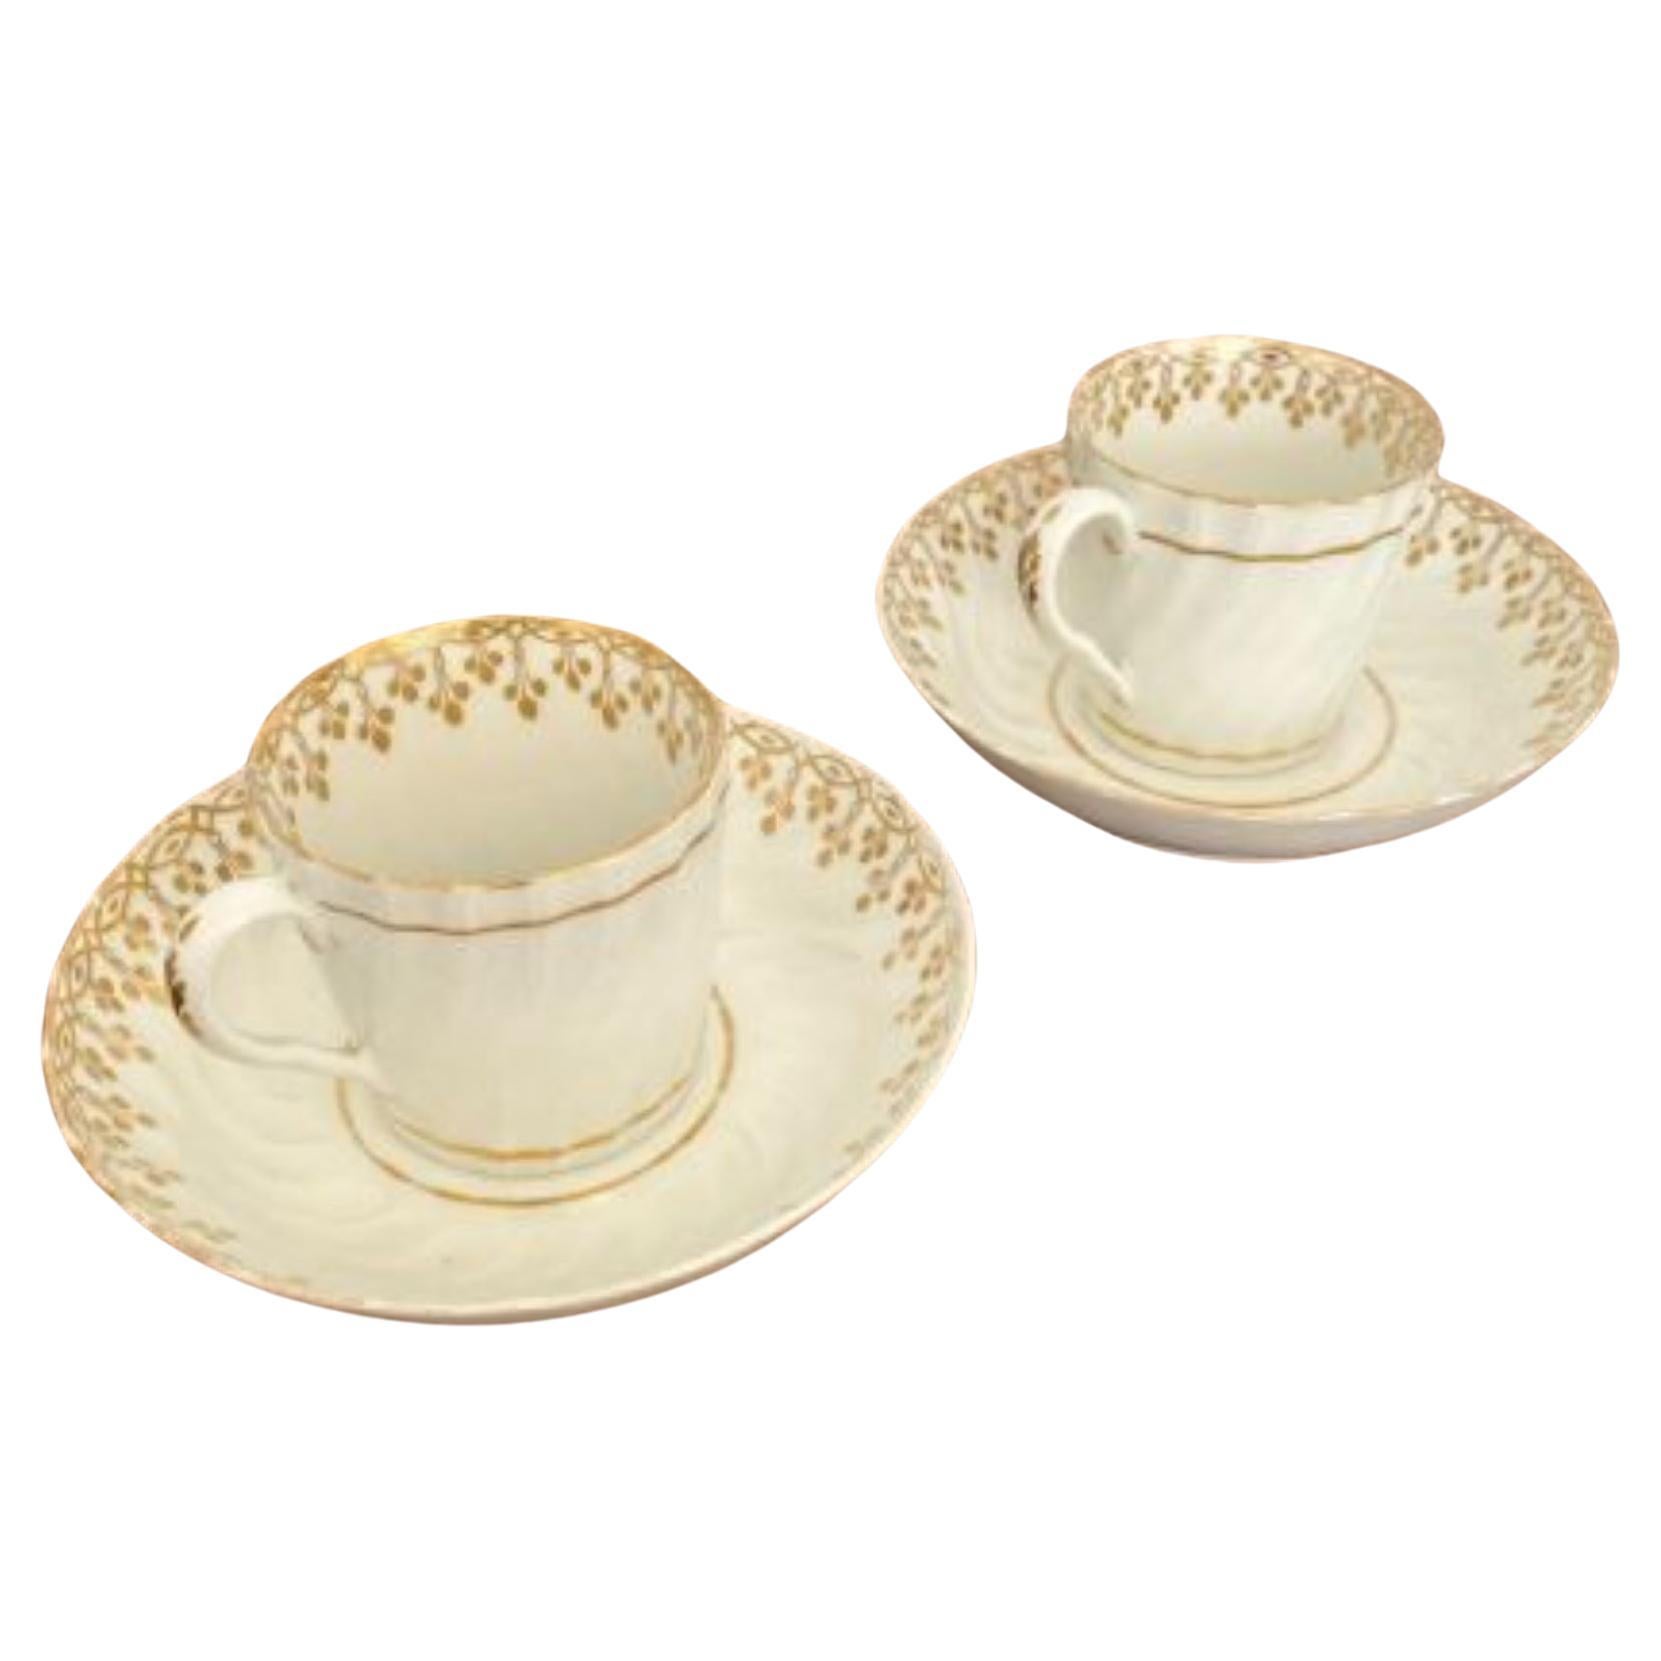 Quality Pair Of 19th Century Teacups & Saucers  For Sale